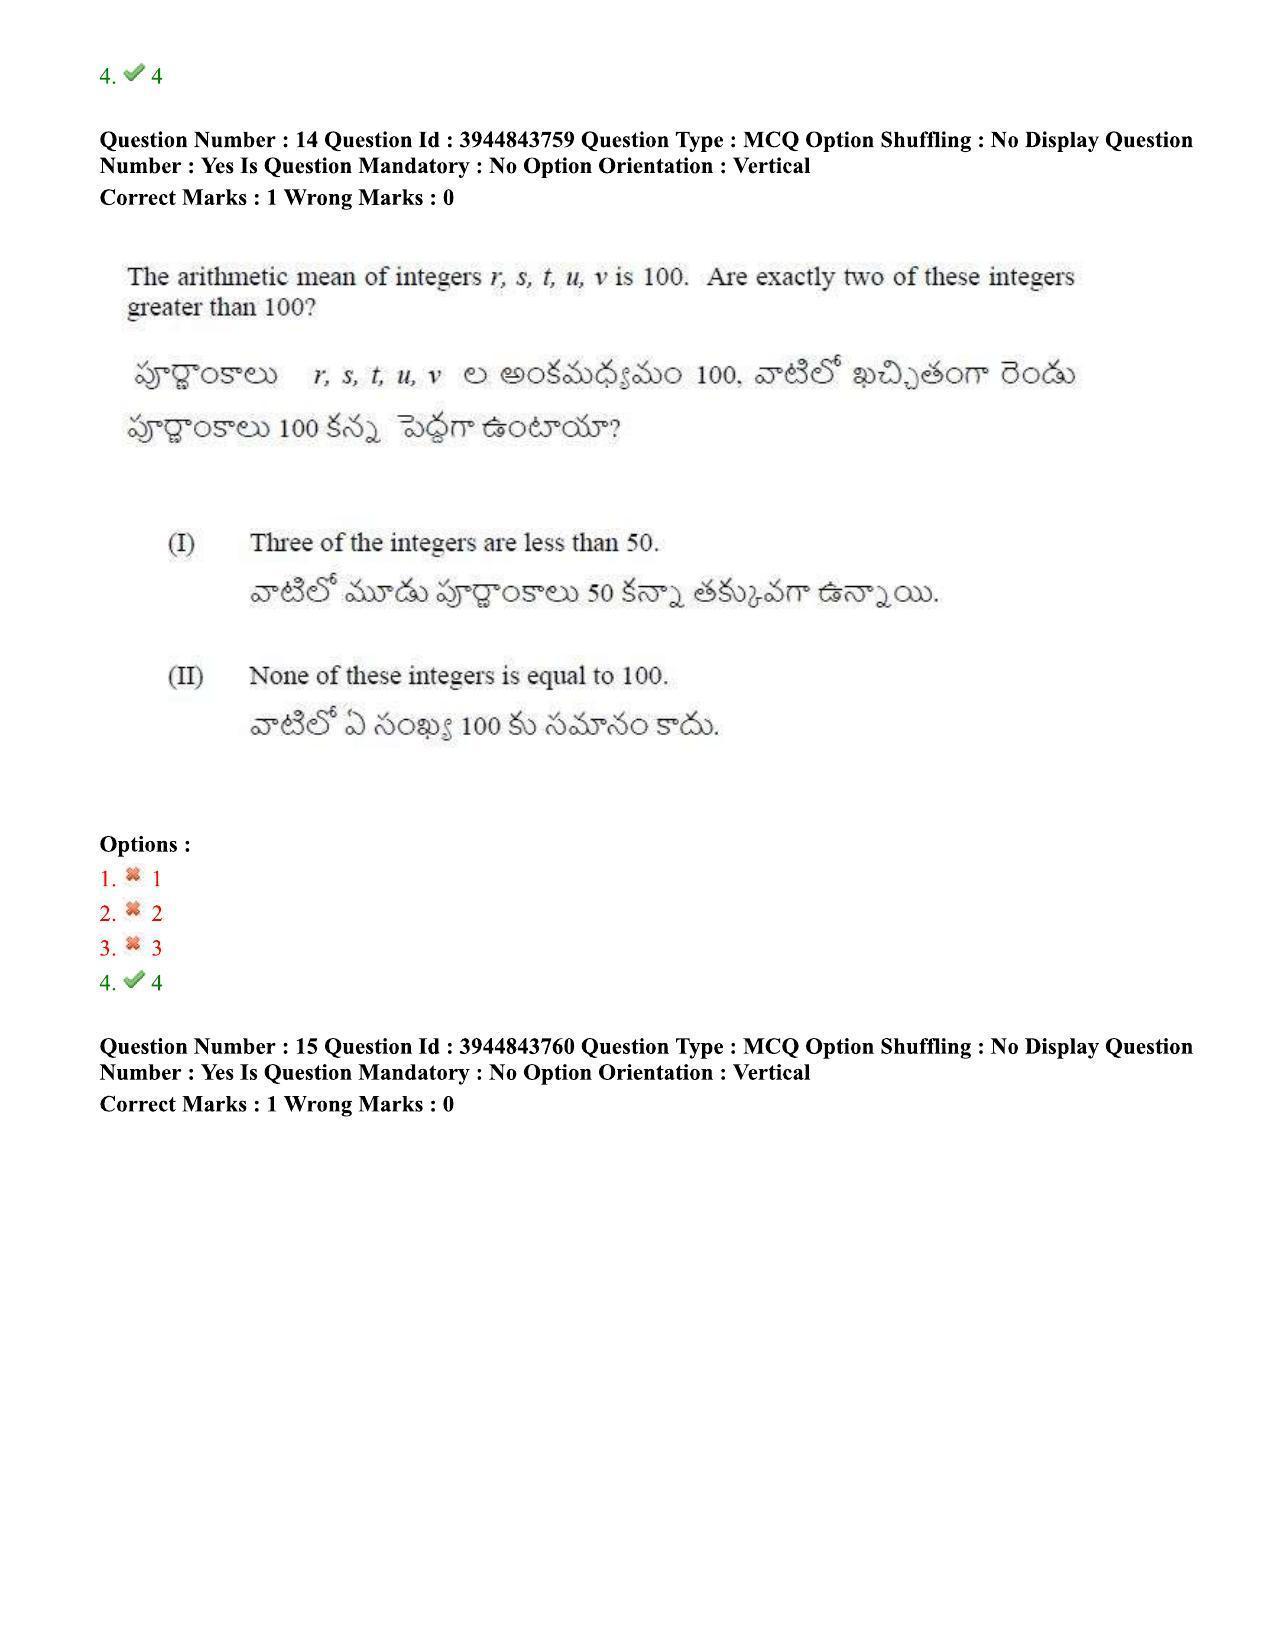 TS ICET 2020 Question Paper 1 - Oct 1, 2020	 - Page 11